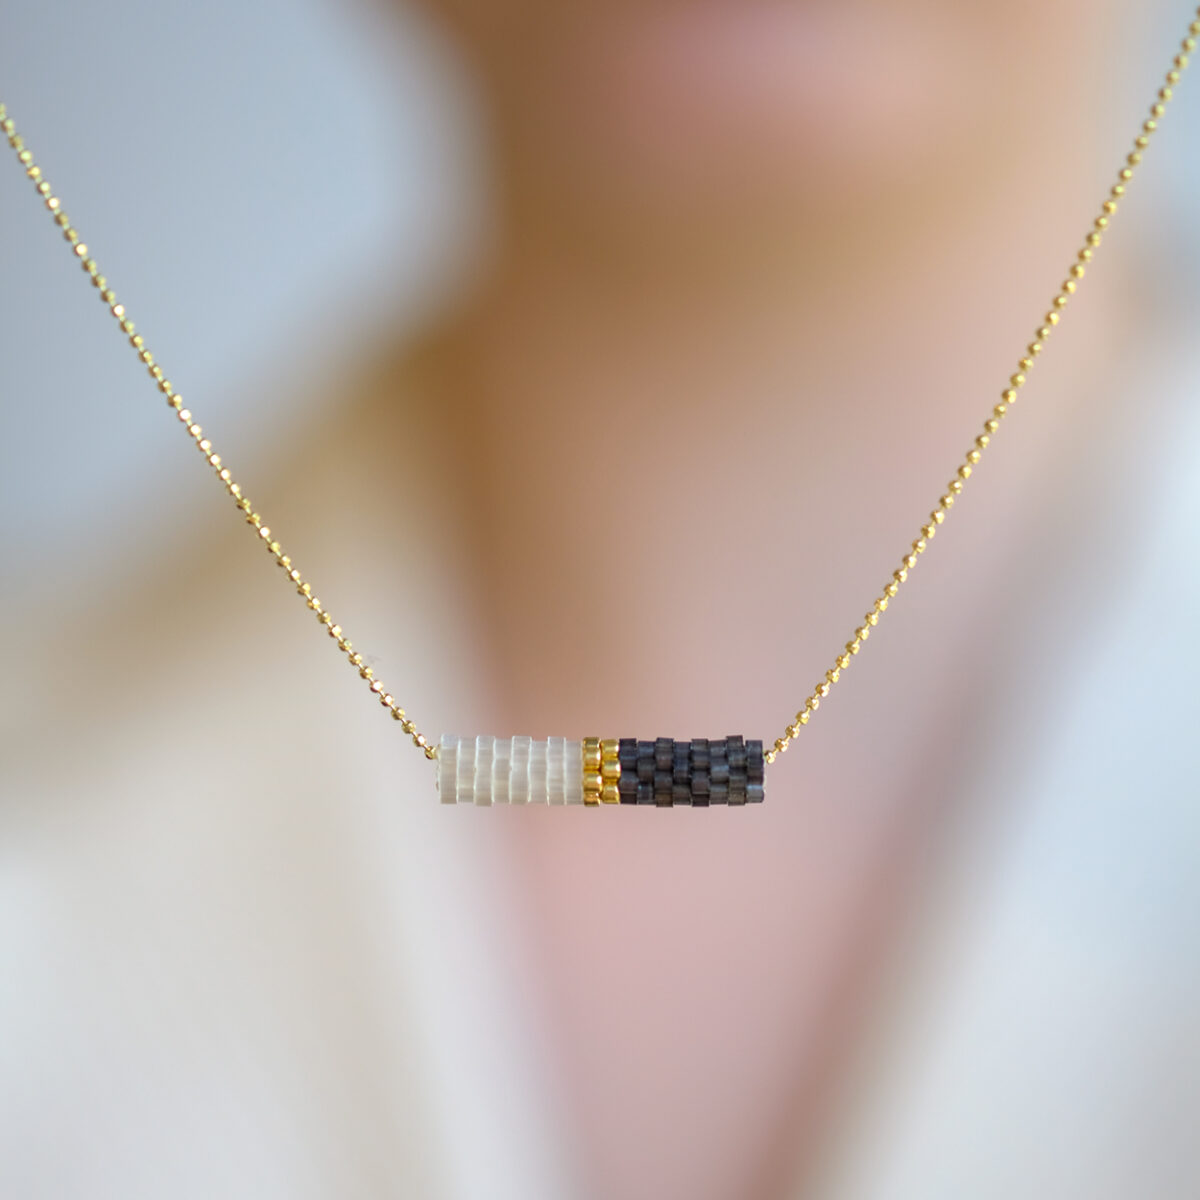 Elegant gold necklace with a bar of white, gold and black beads displayed on a blurred background.